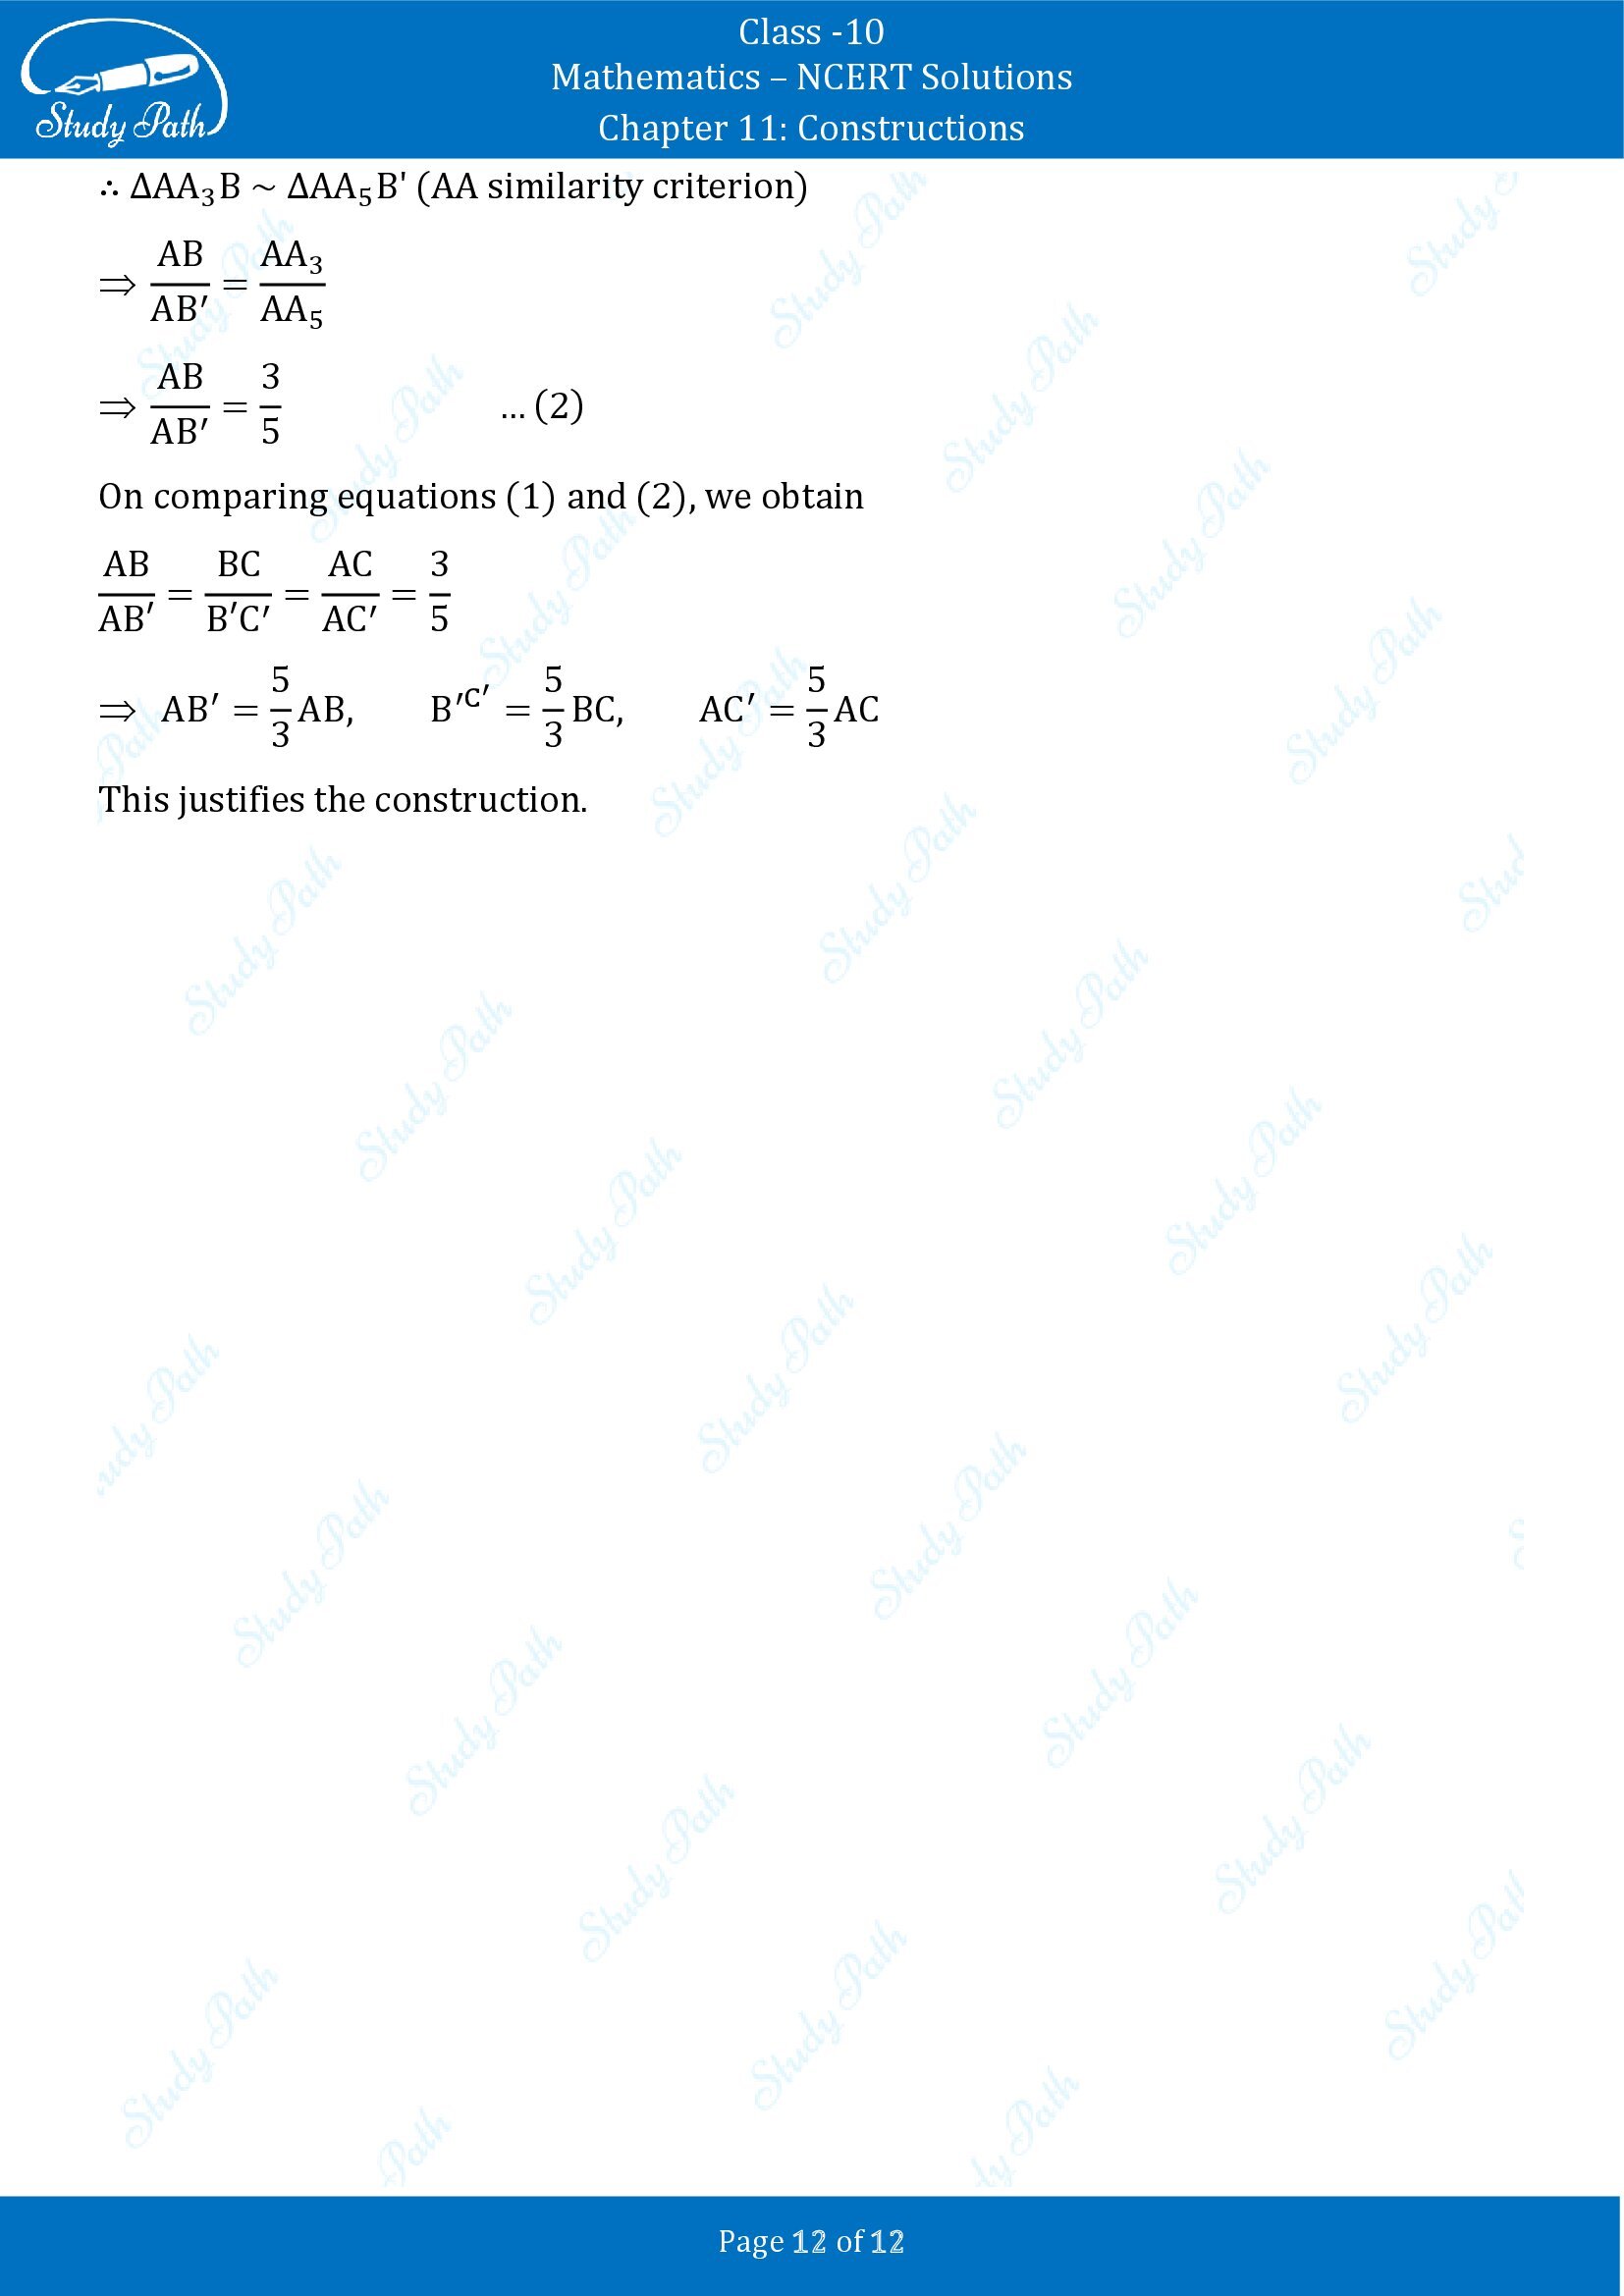 NCERT Solutions for Class 10 Maths Chapter 11 Constructions Exercise 11.1 00012